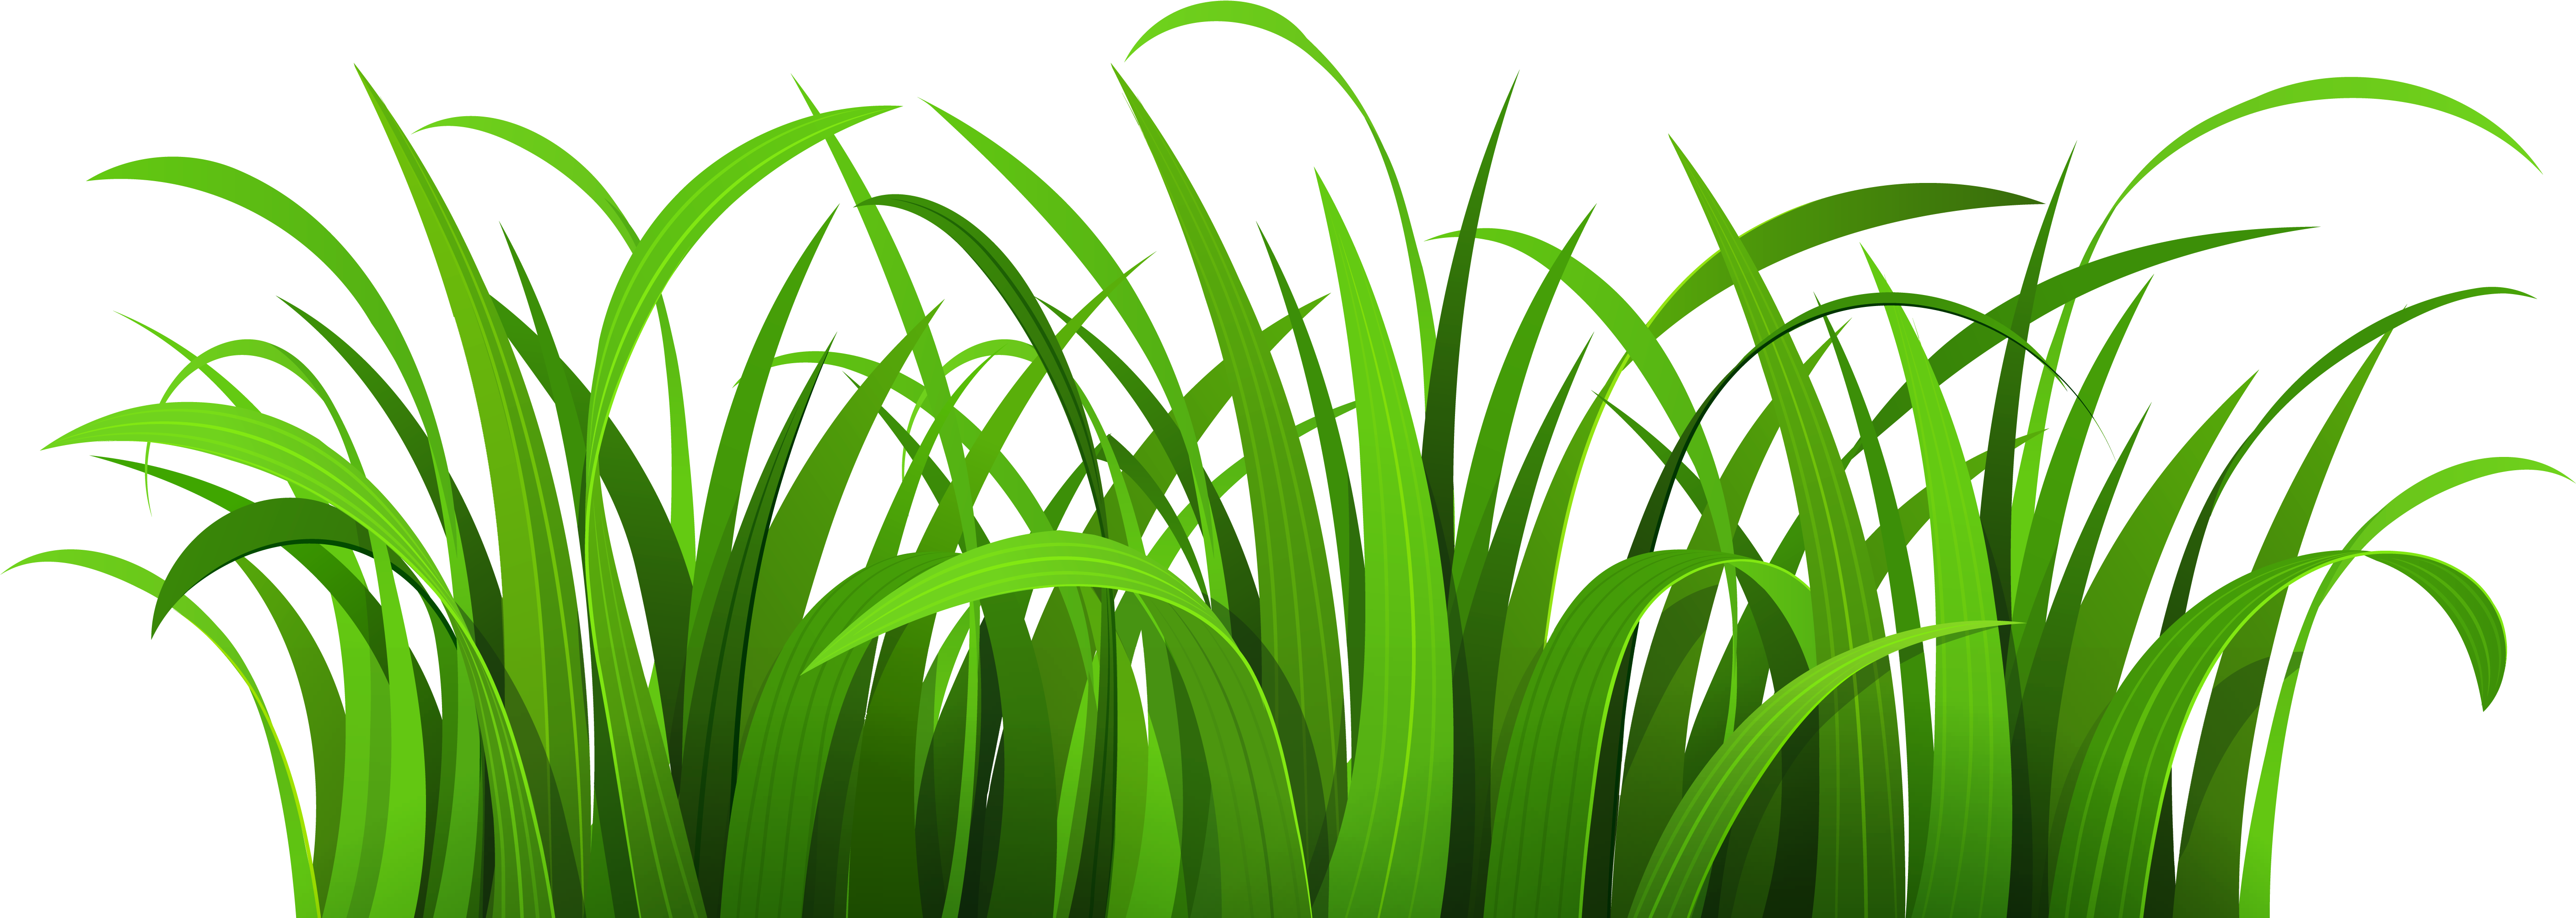 Free Transparent Grass Clipart, Download Free Clip Art, Free.